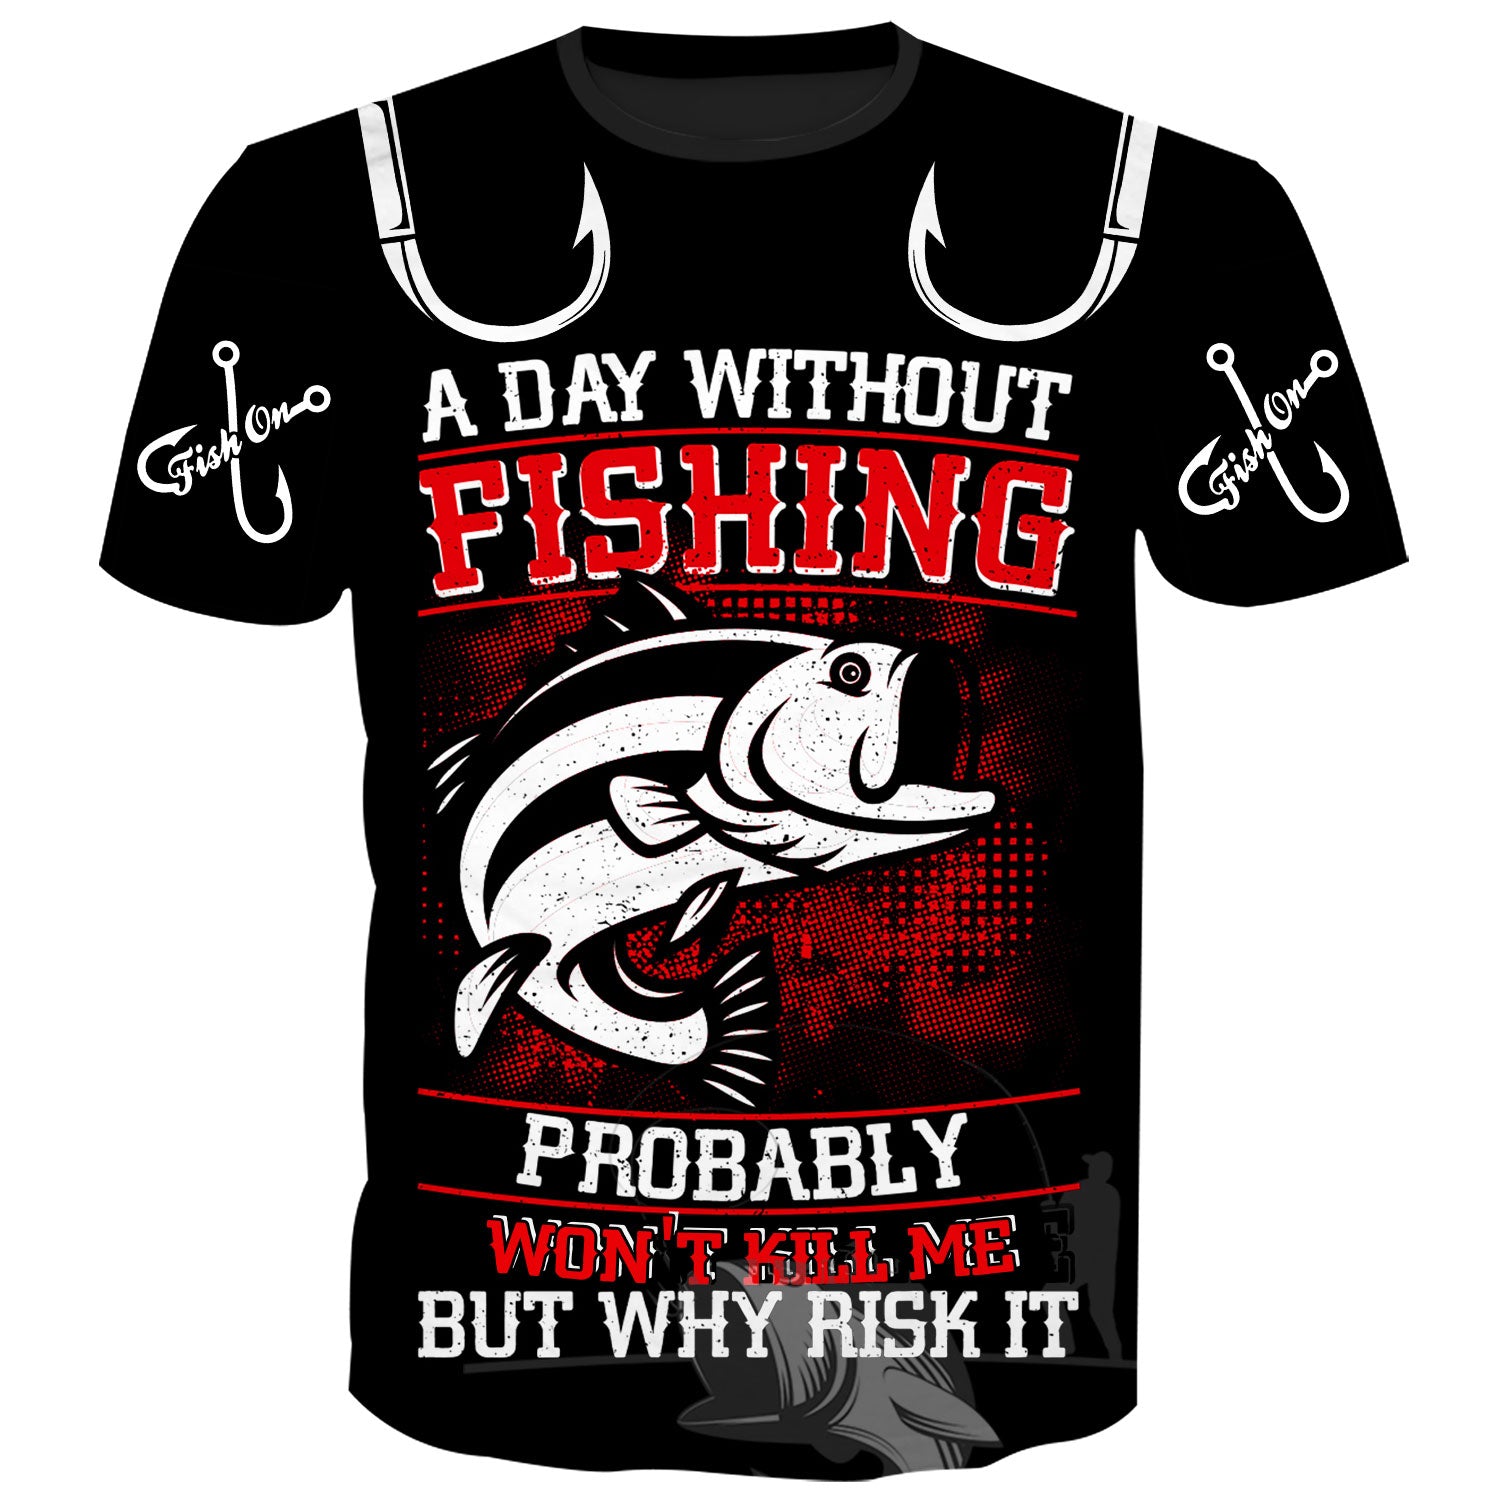 A close-up of a vibrant fish  amidst the humorous text on the funny fishing t-shirt.